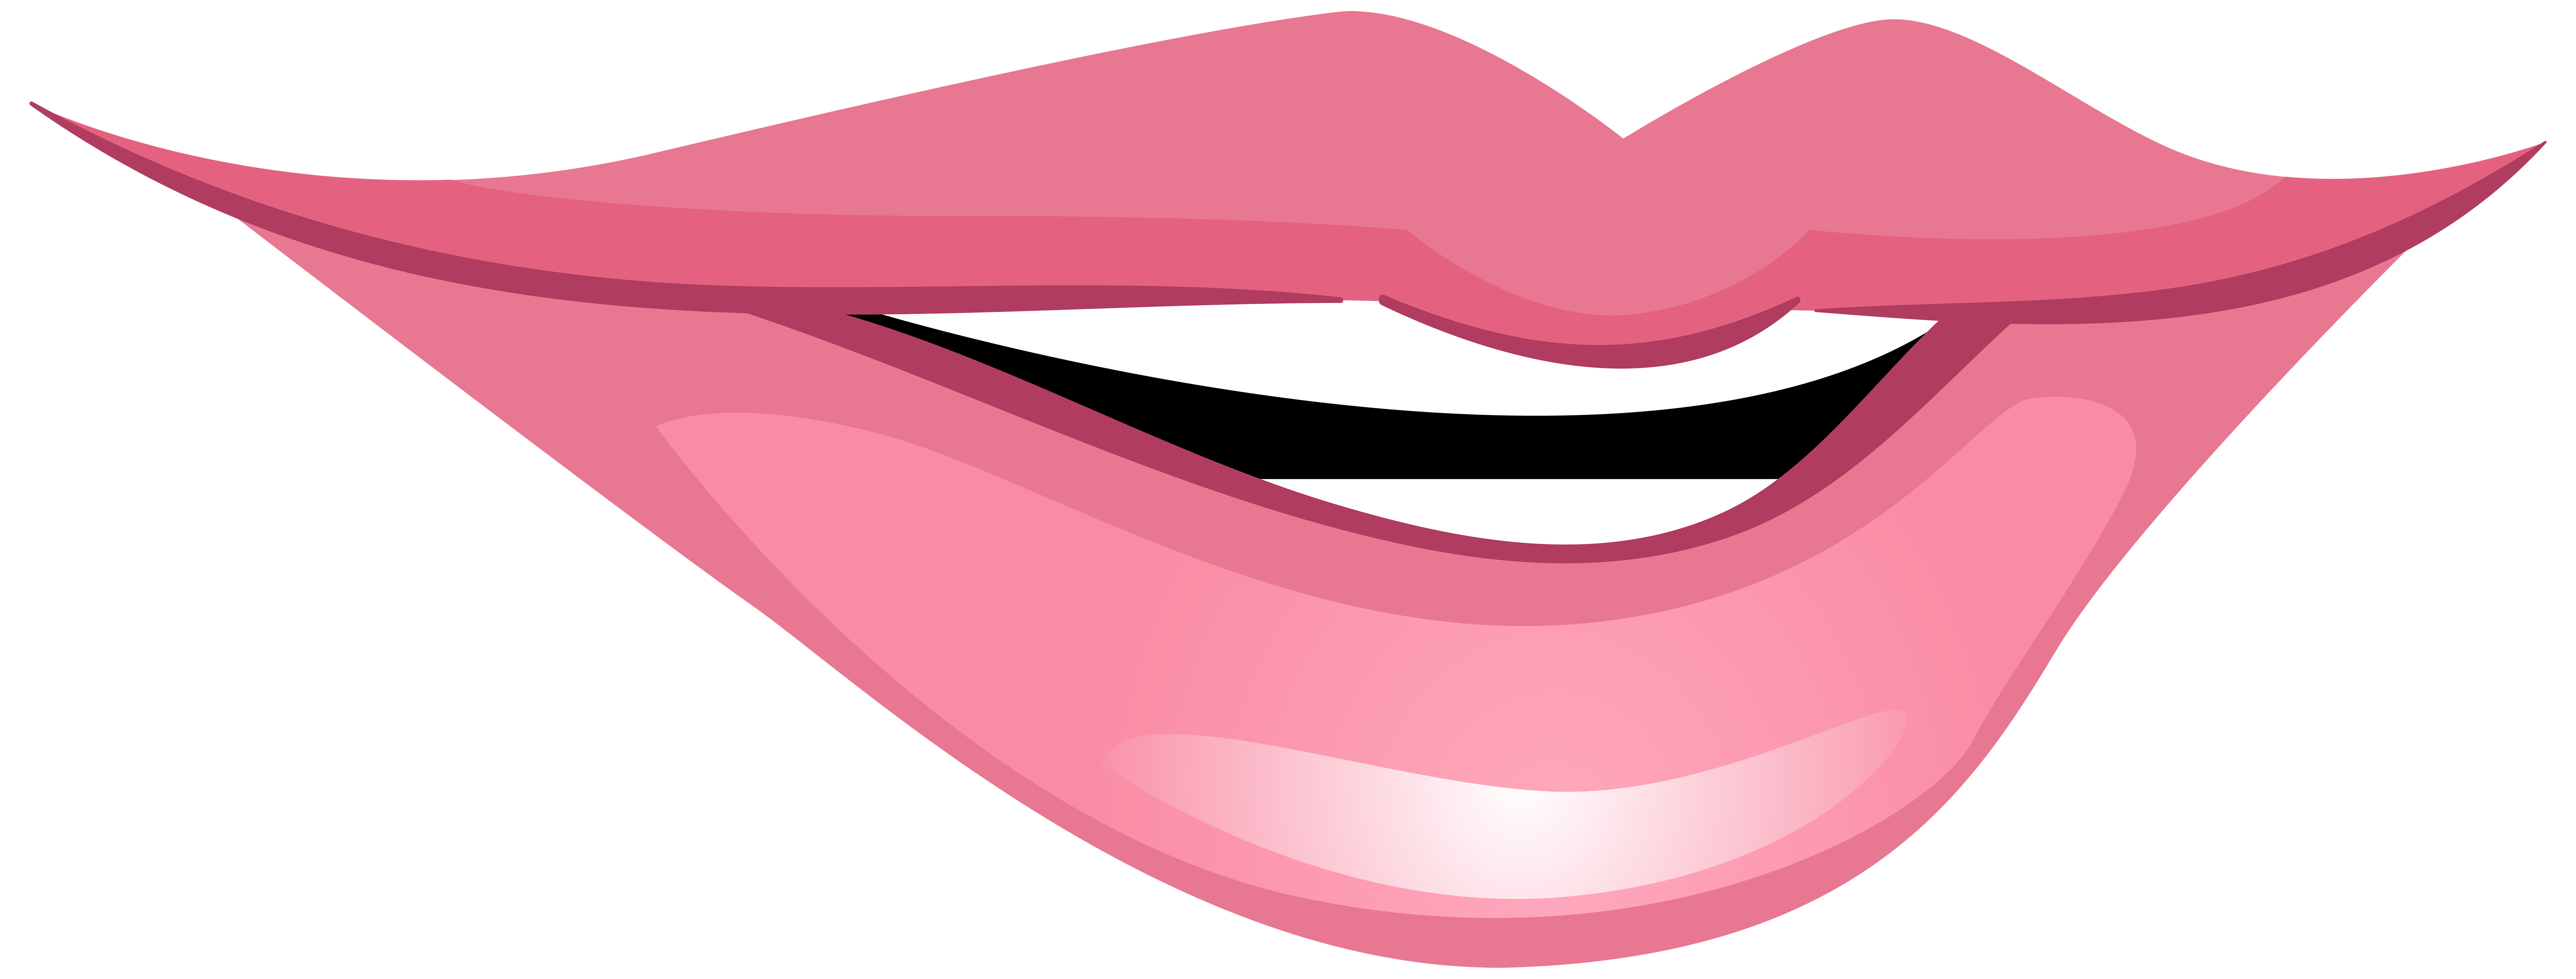 Pink Smiling Mouth PNG Clip Art.